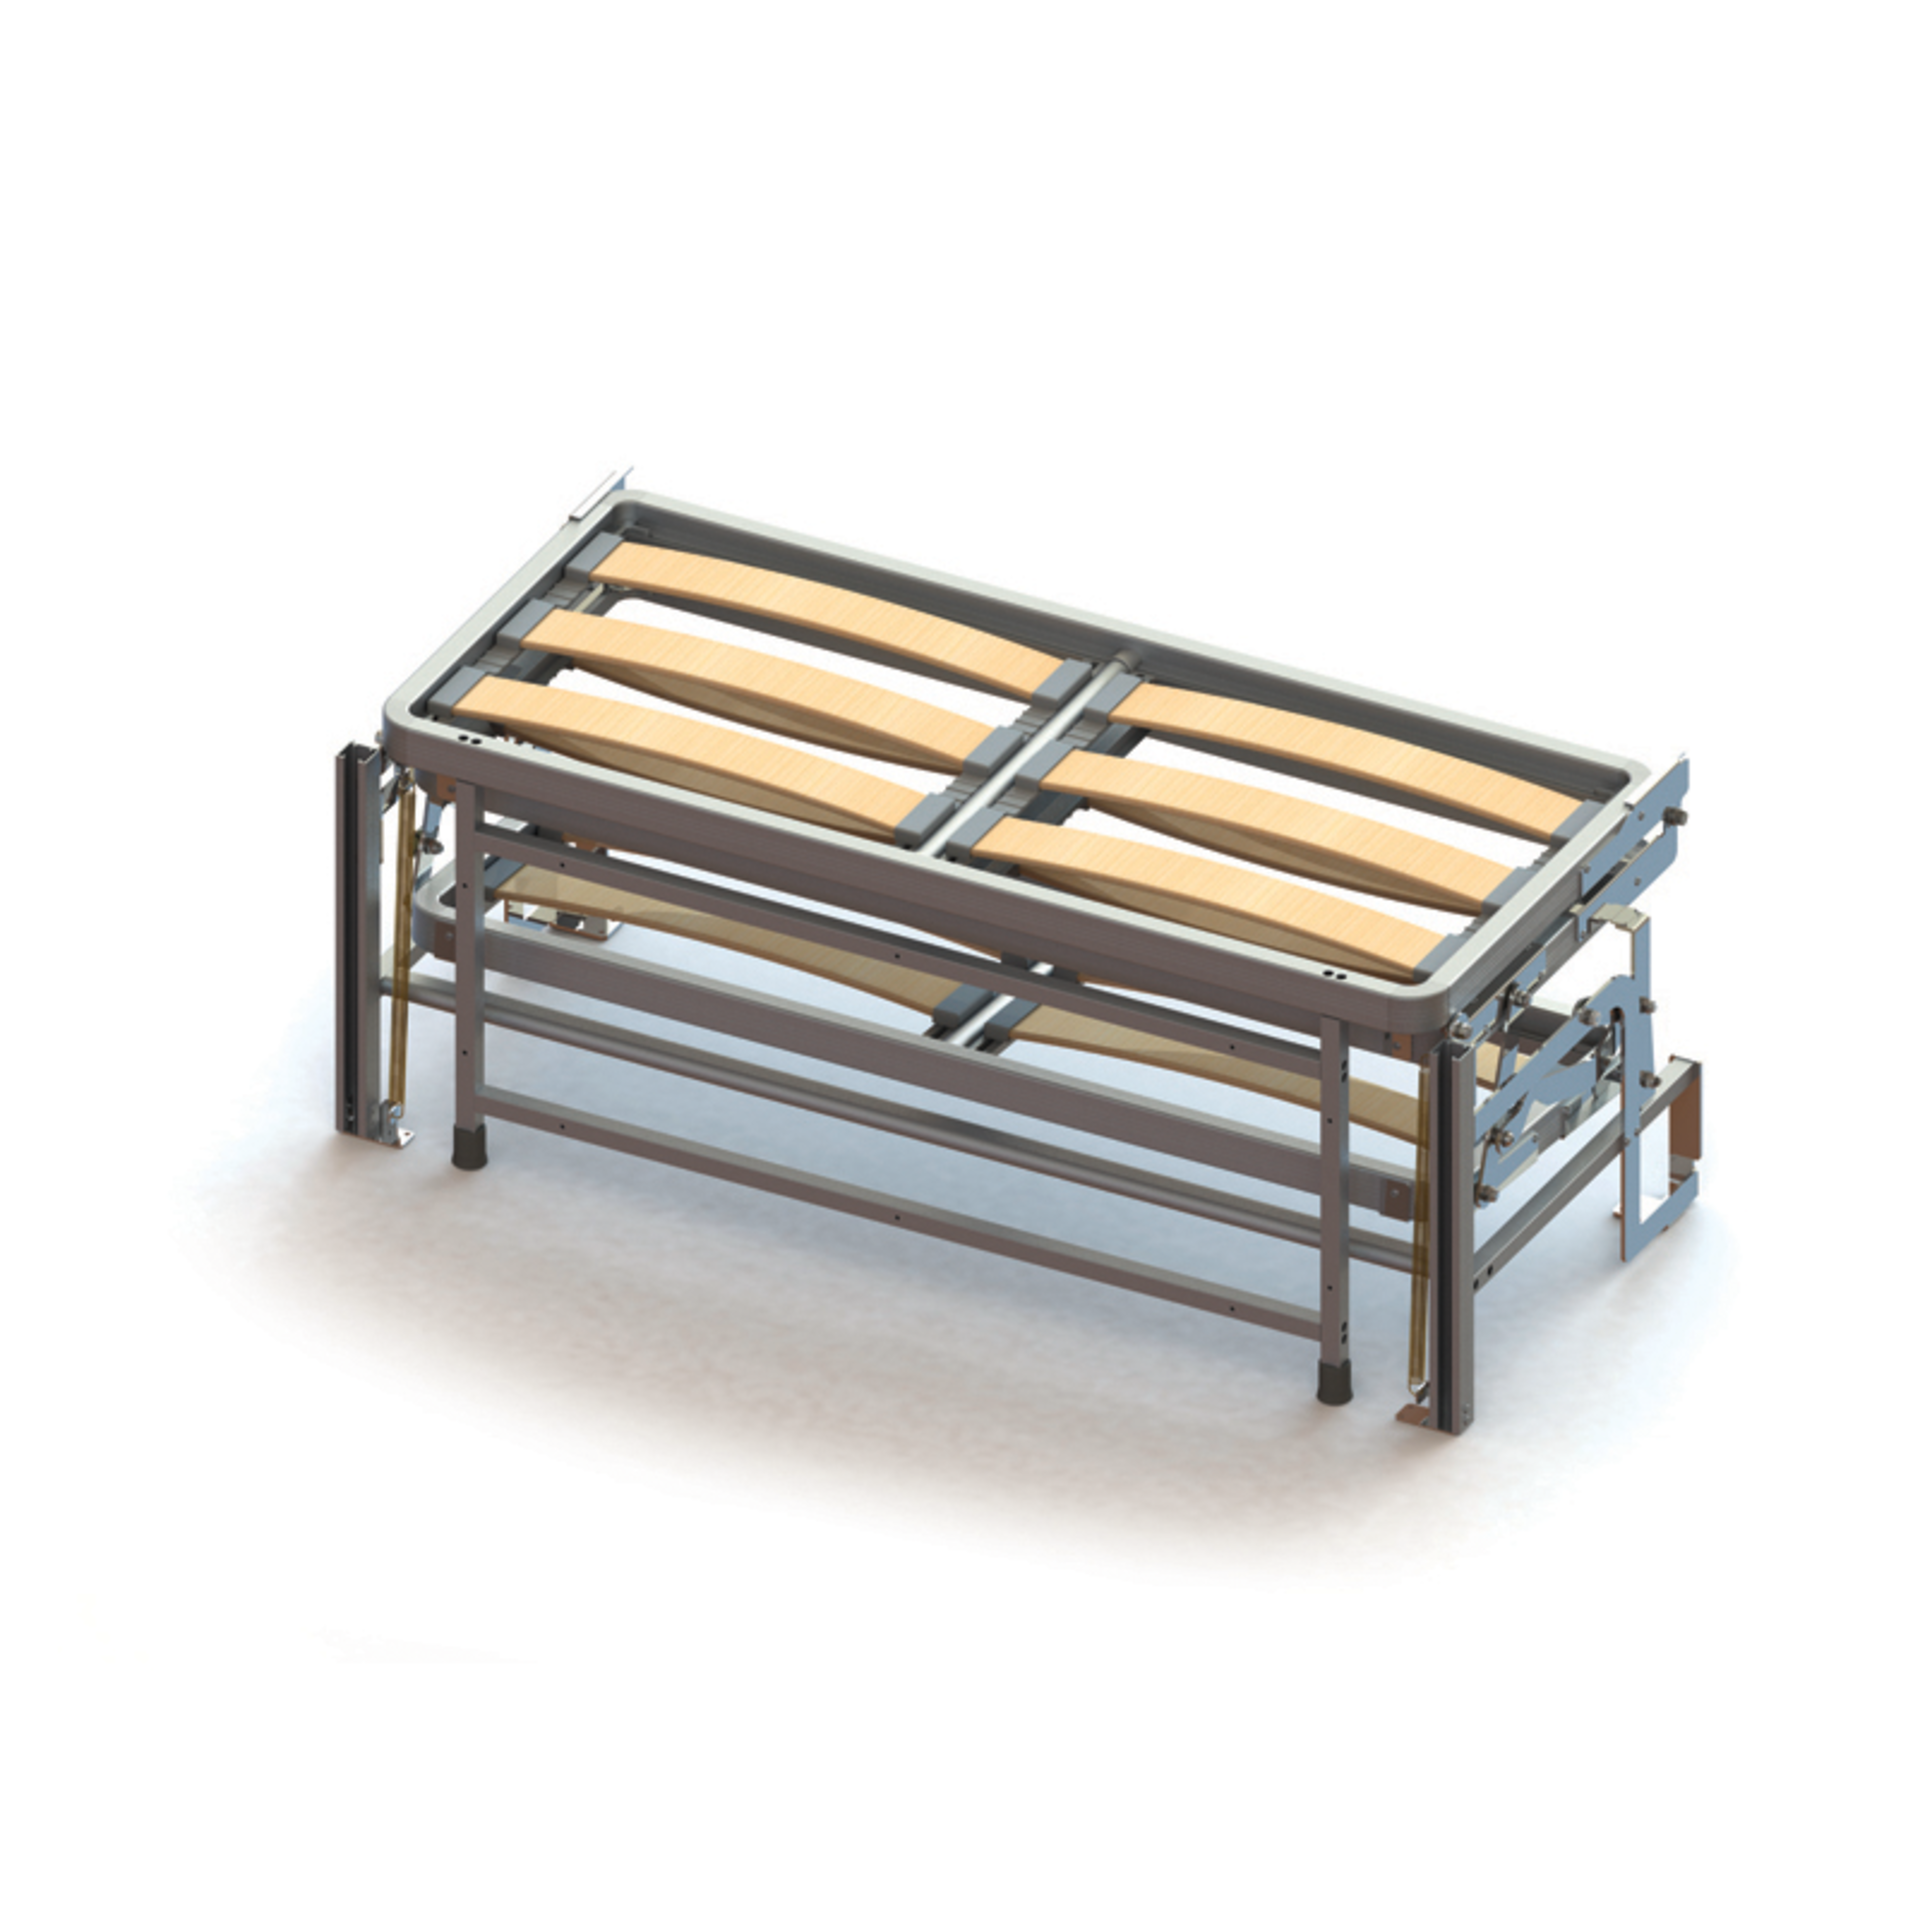 1 x Project 2000 Pull Out Seating Bench and Bed Frame For Caravans or Campervans - Height 40 x Width - Image 16 of 16